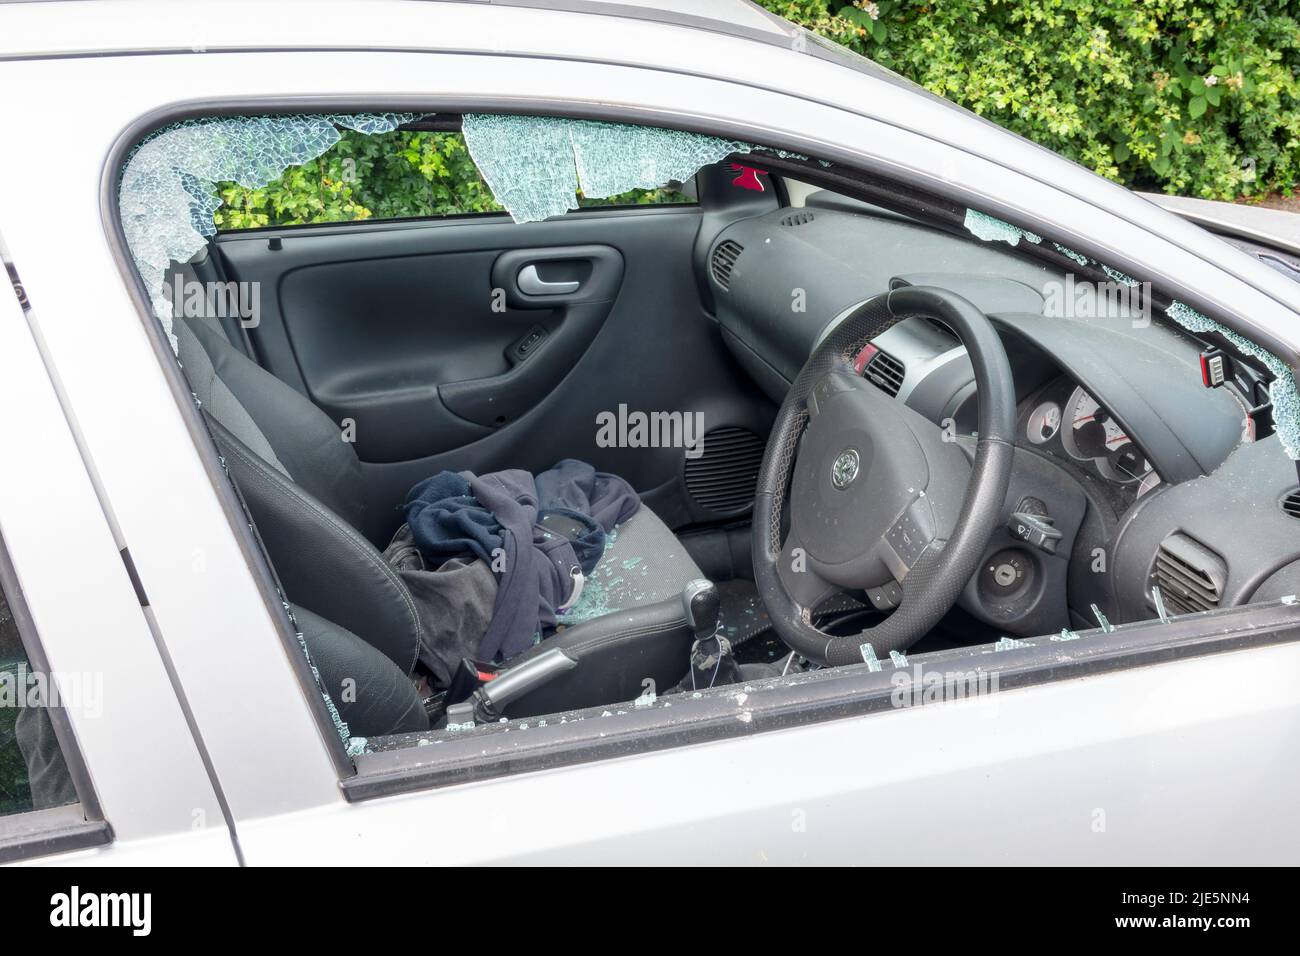 A car with its drivers side window smashed after being attacked by a thief. Shattered glass from the window is shown on the seats inside the insecure vehicle Stock Photo